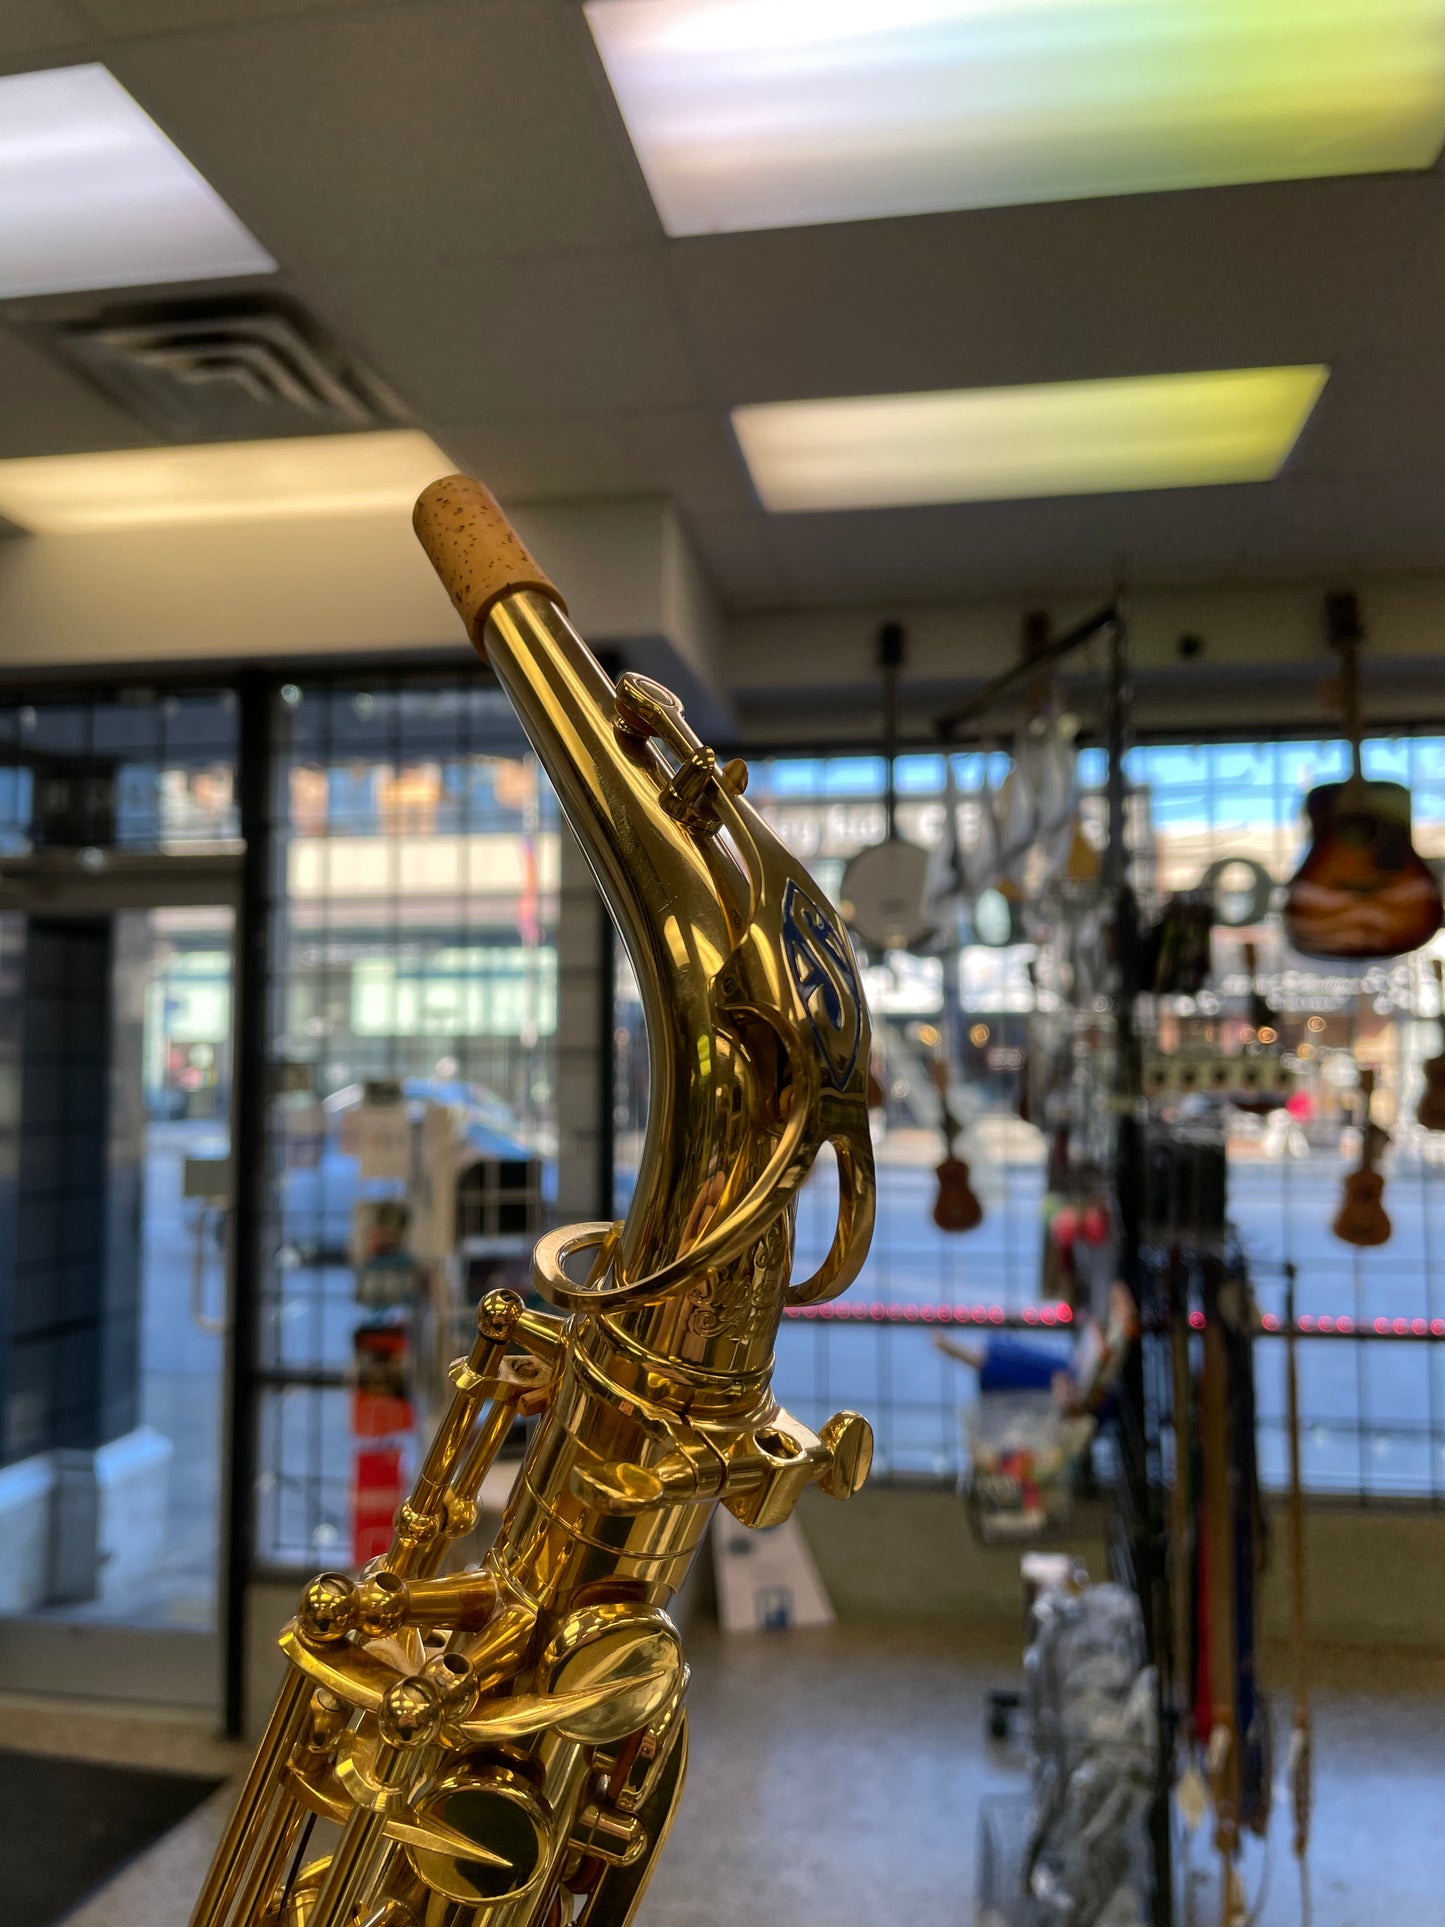 Pre-Owned Selmer Super Action 80 Series II Alto Saxophone